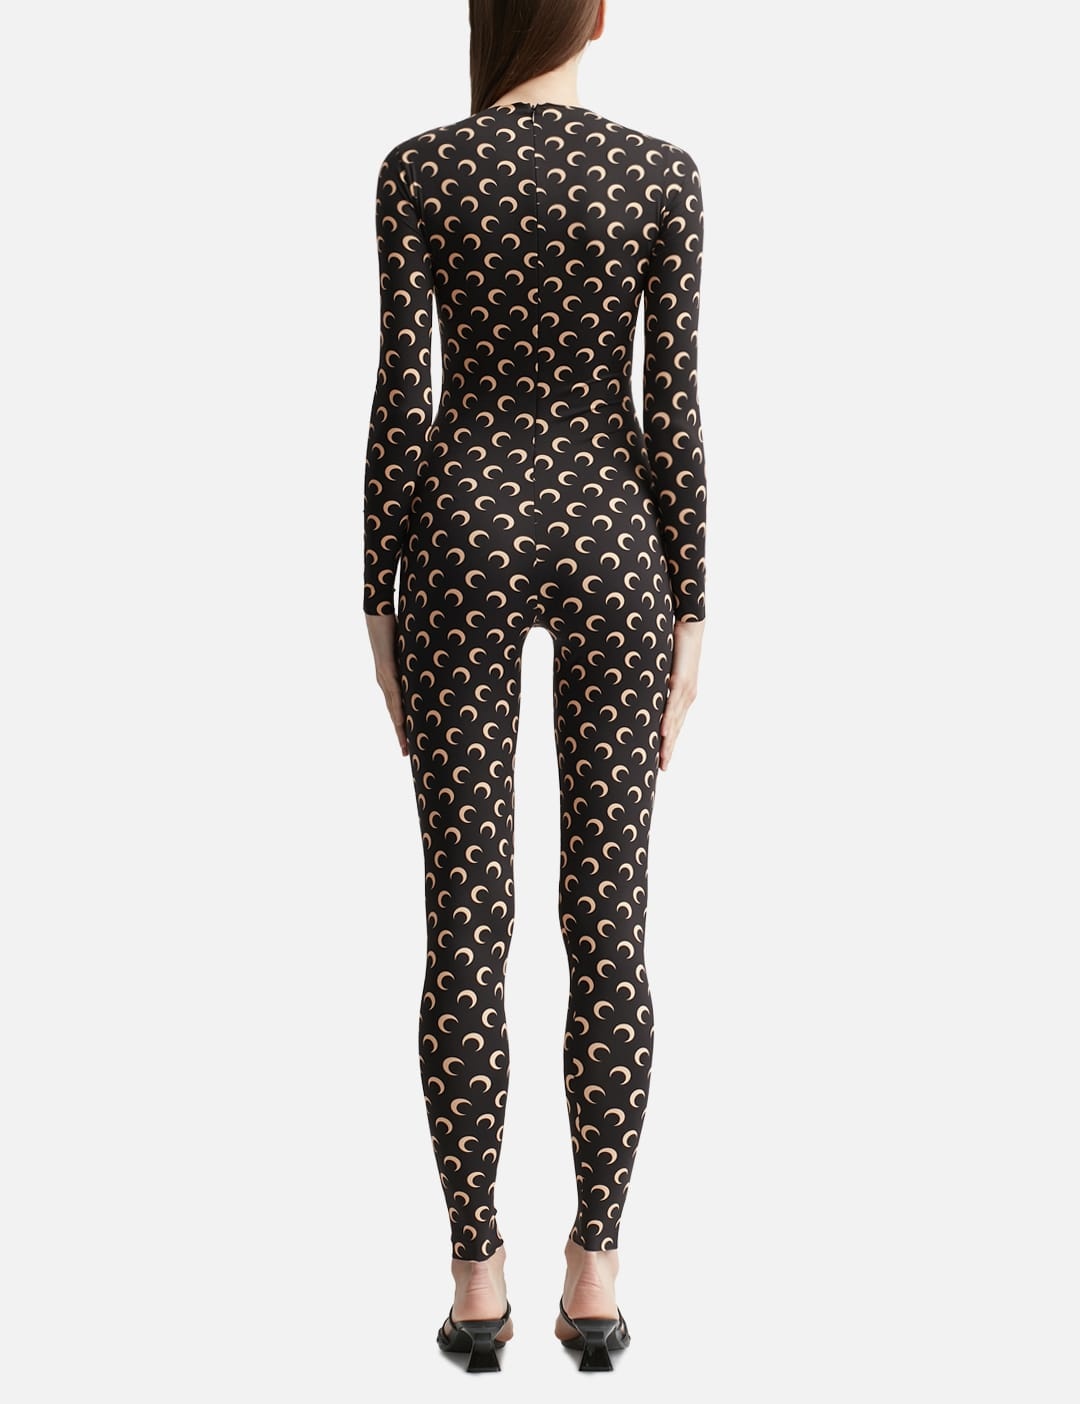 PRINTED CATSUIT - 3